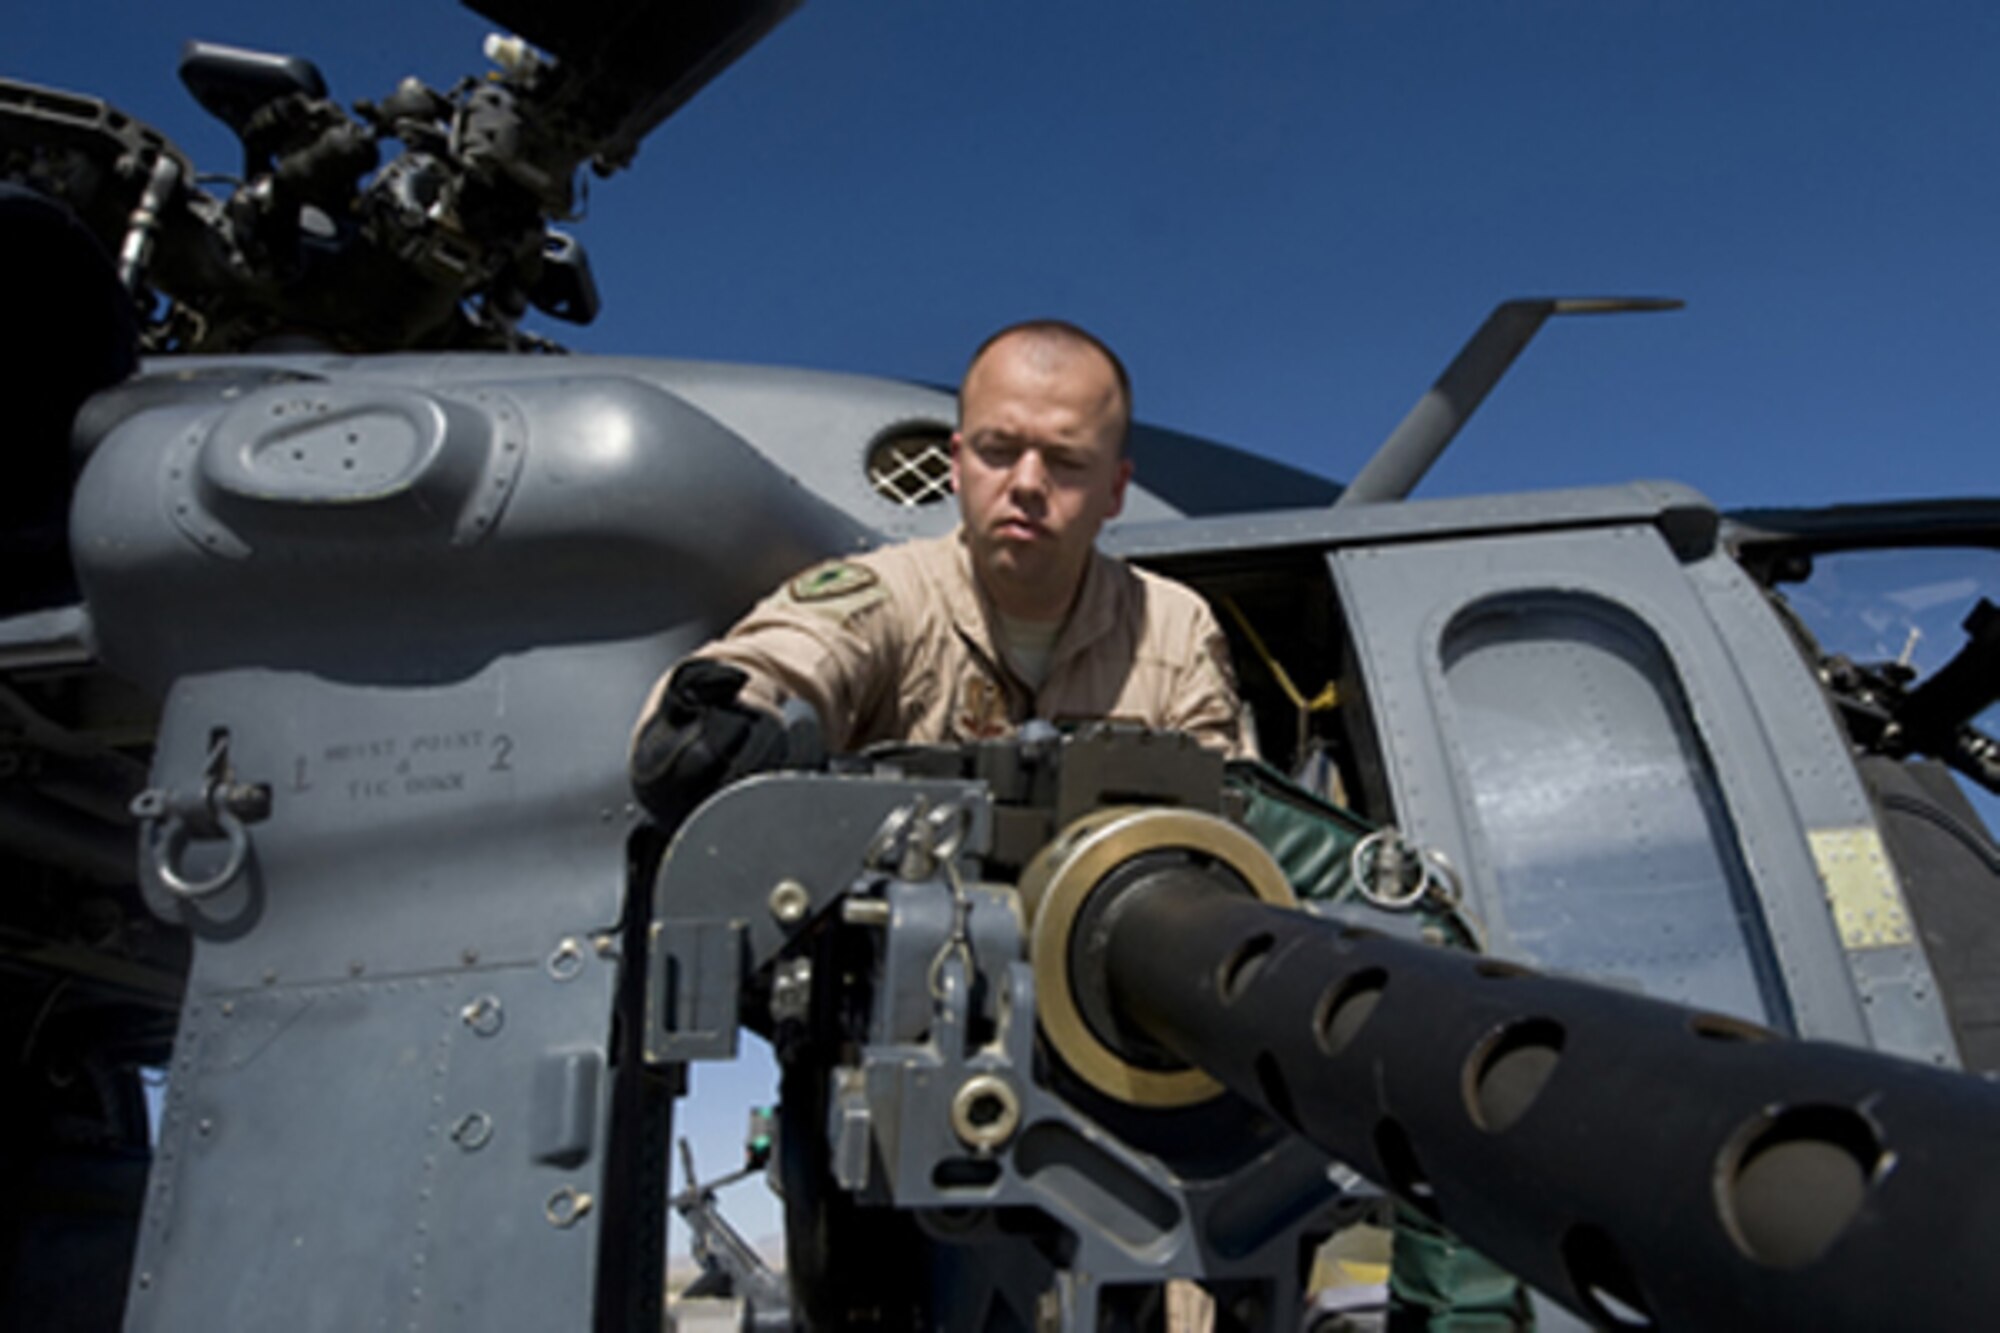 Staff Sgt. David Mullikin conducts a pre-operations check on a 50-caliber machine gun attached to an HH-60 Pave Hawk June 23, 2011, at Nellis Air Force Base, Nev. Sergeant Mullikin is a flight engineer assigned to the 66th Rescue Squadron. He returned from a tour in Iraq suffering from post-traumatic stress disorder and got help through the Air Force Wounded Warrior program. (U.S Air Force photo/Senior Airman Stephanie Rubi) 